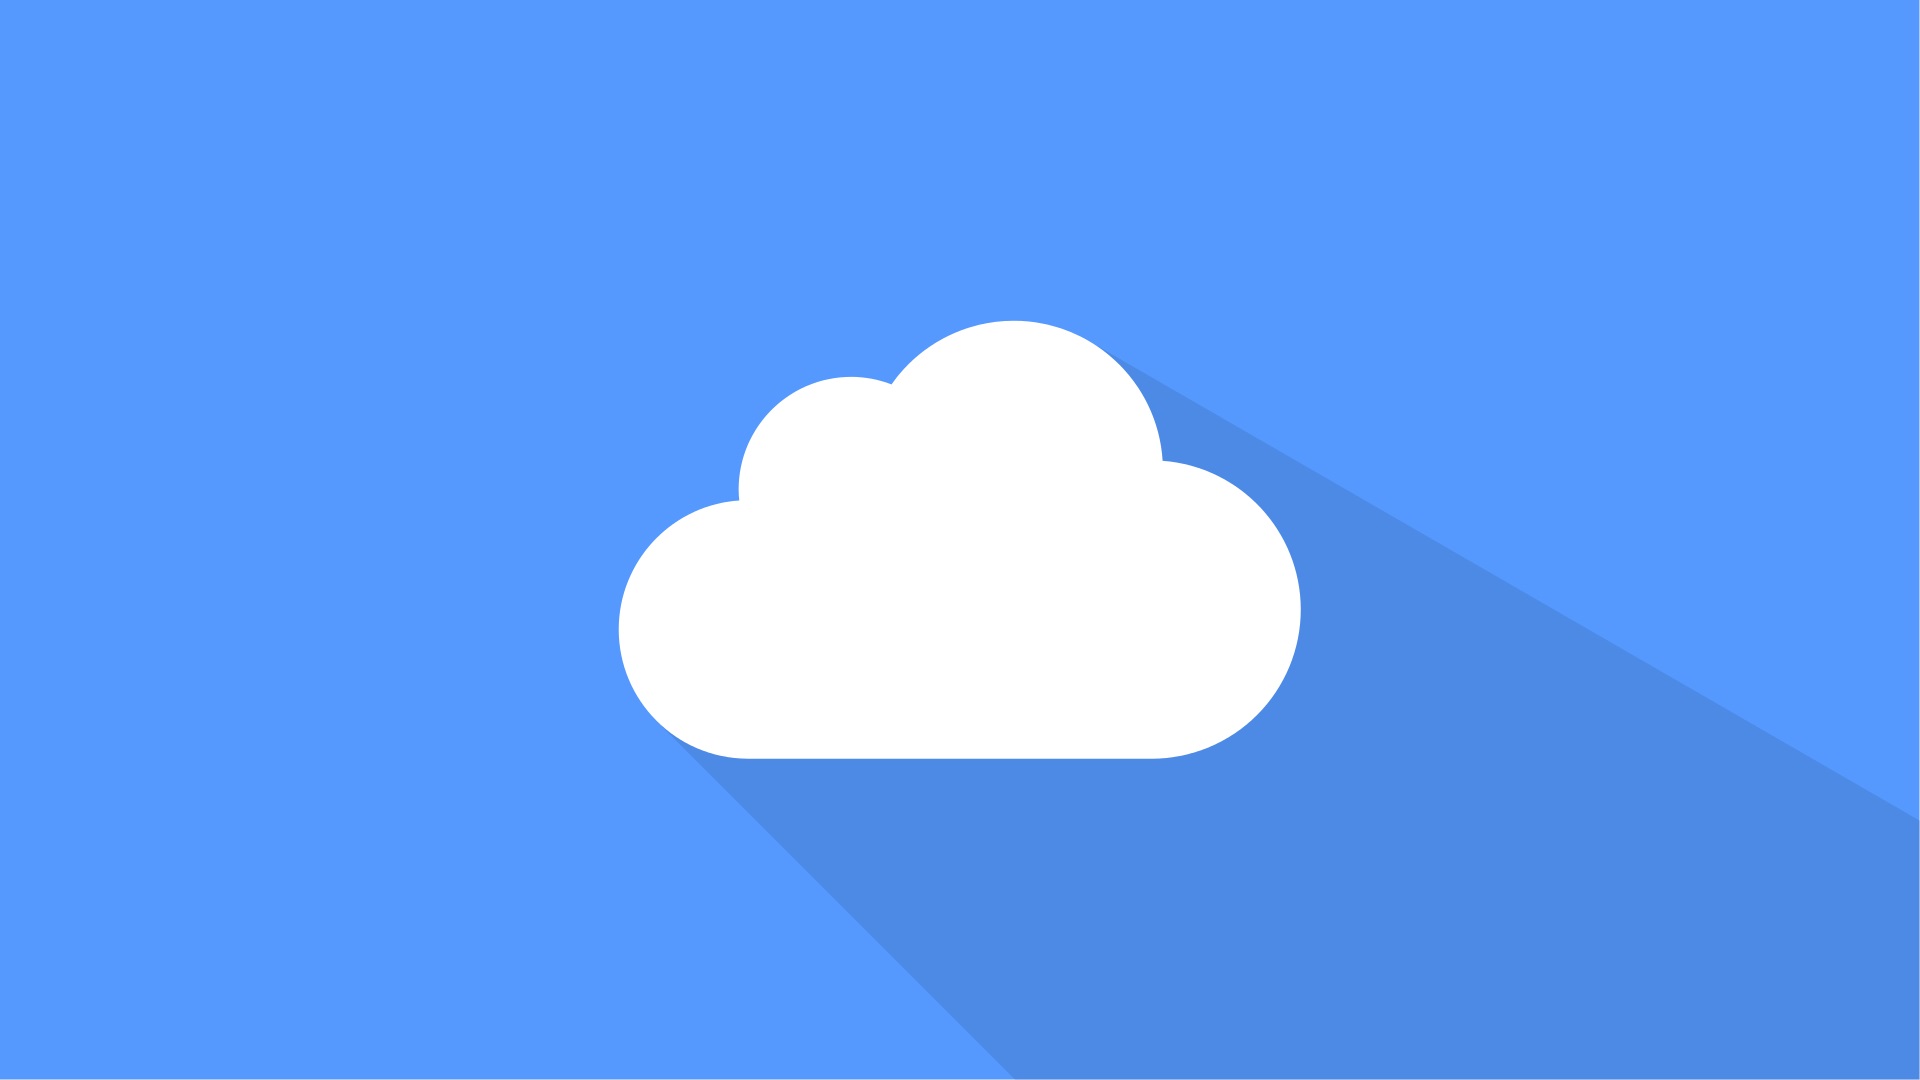 A graphic of a white cloud against a blue background